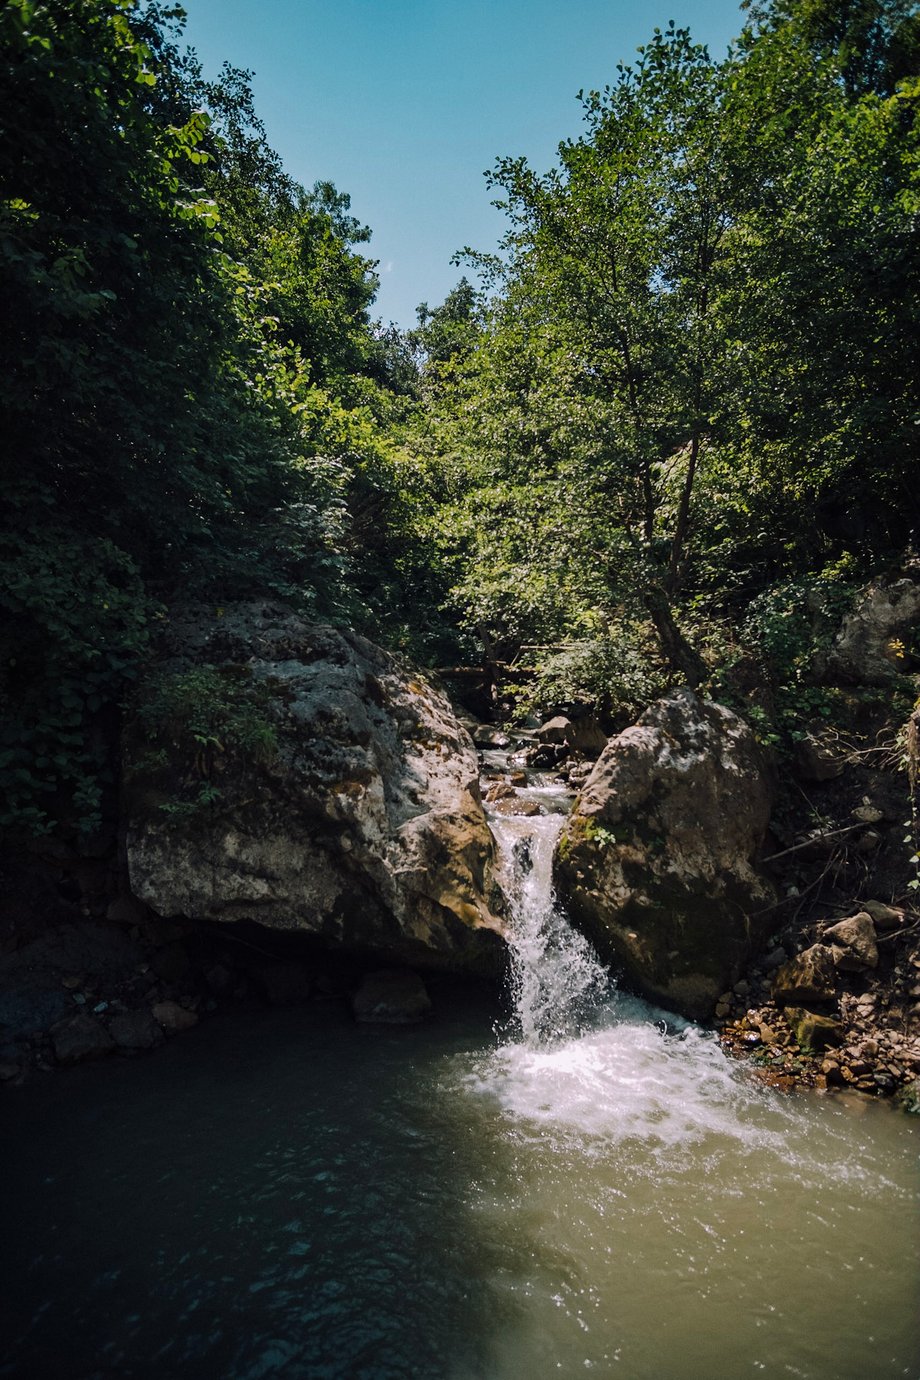 Dmitri Mais' shot of a waterfall and swimming hole on Paradise Trail